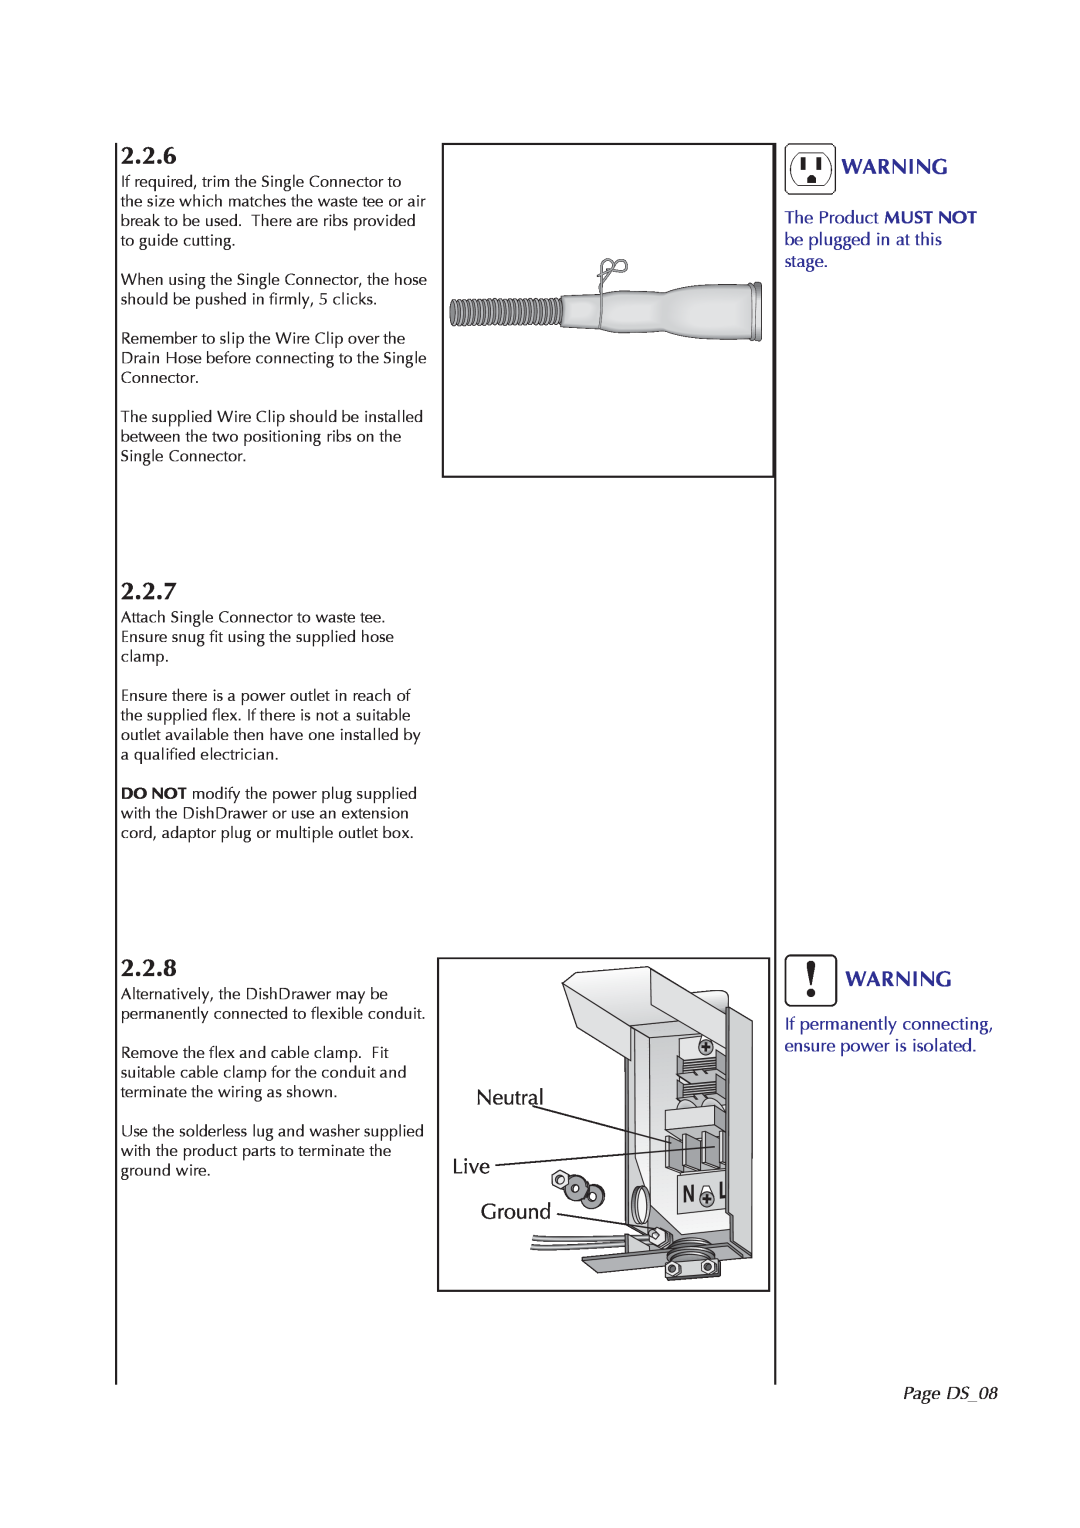 Fisher & Paykel DS602I manual 2.2.6, 2.2.7, 2.2.8, The Product MUST NOT be plugged in at this stage, Page DS08 